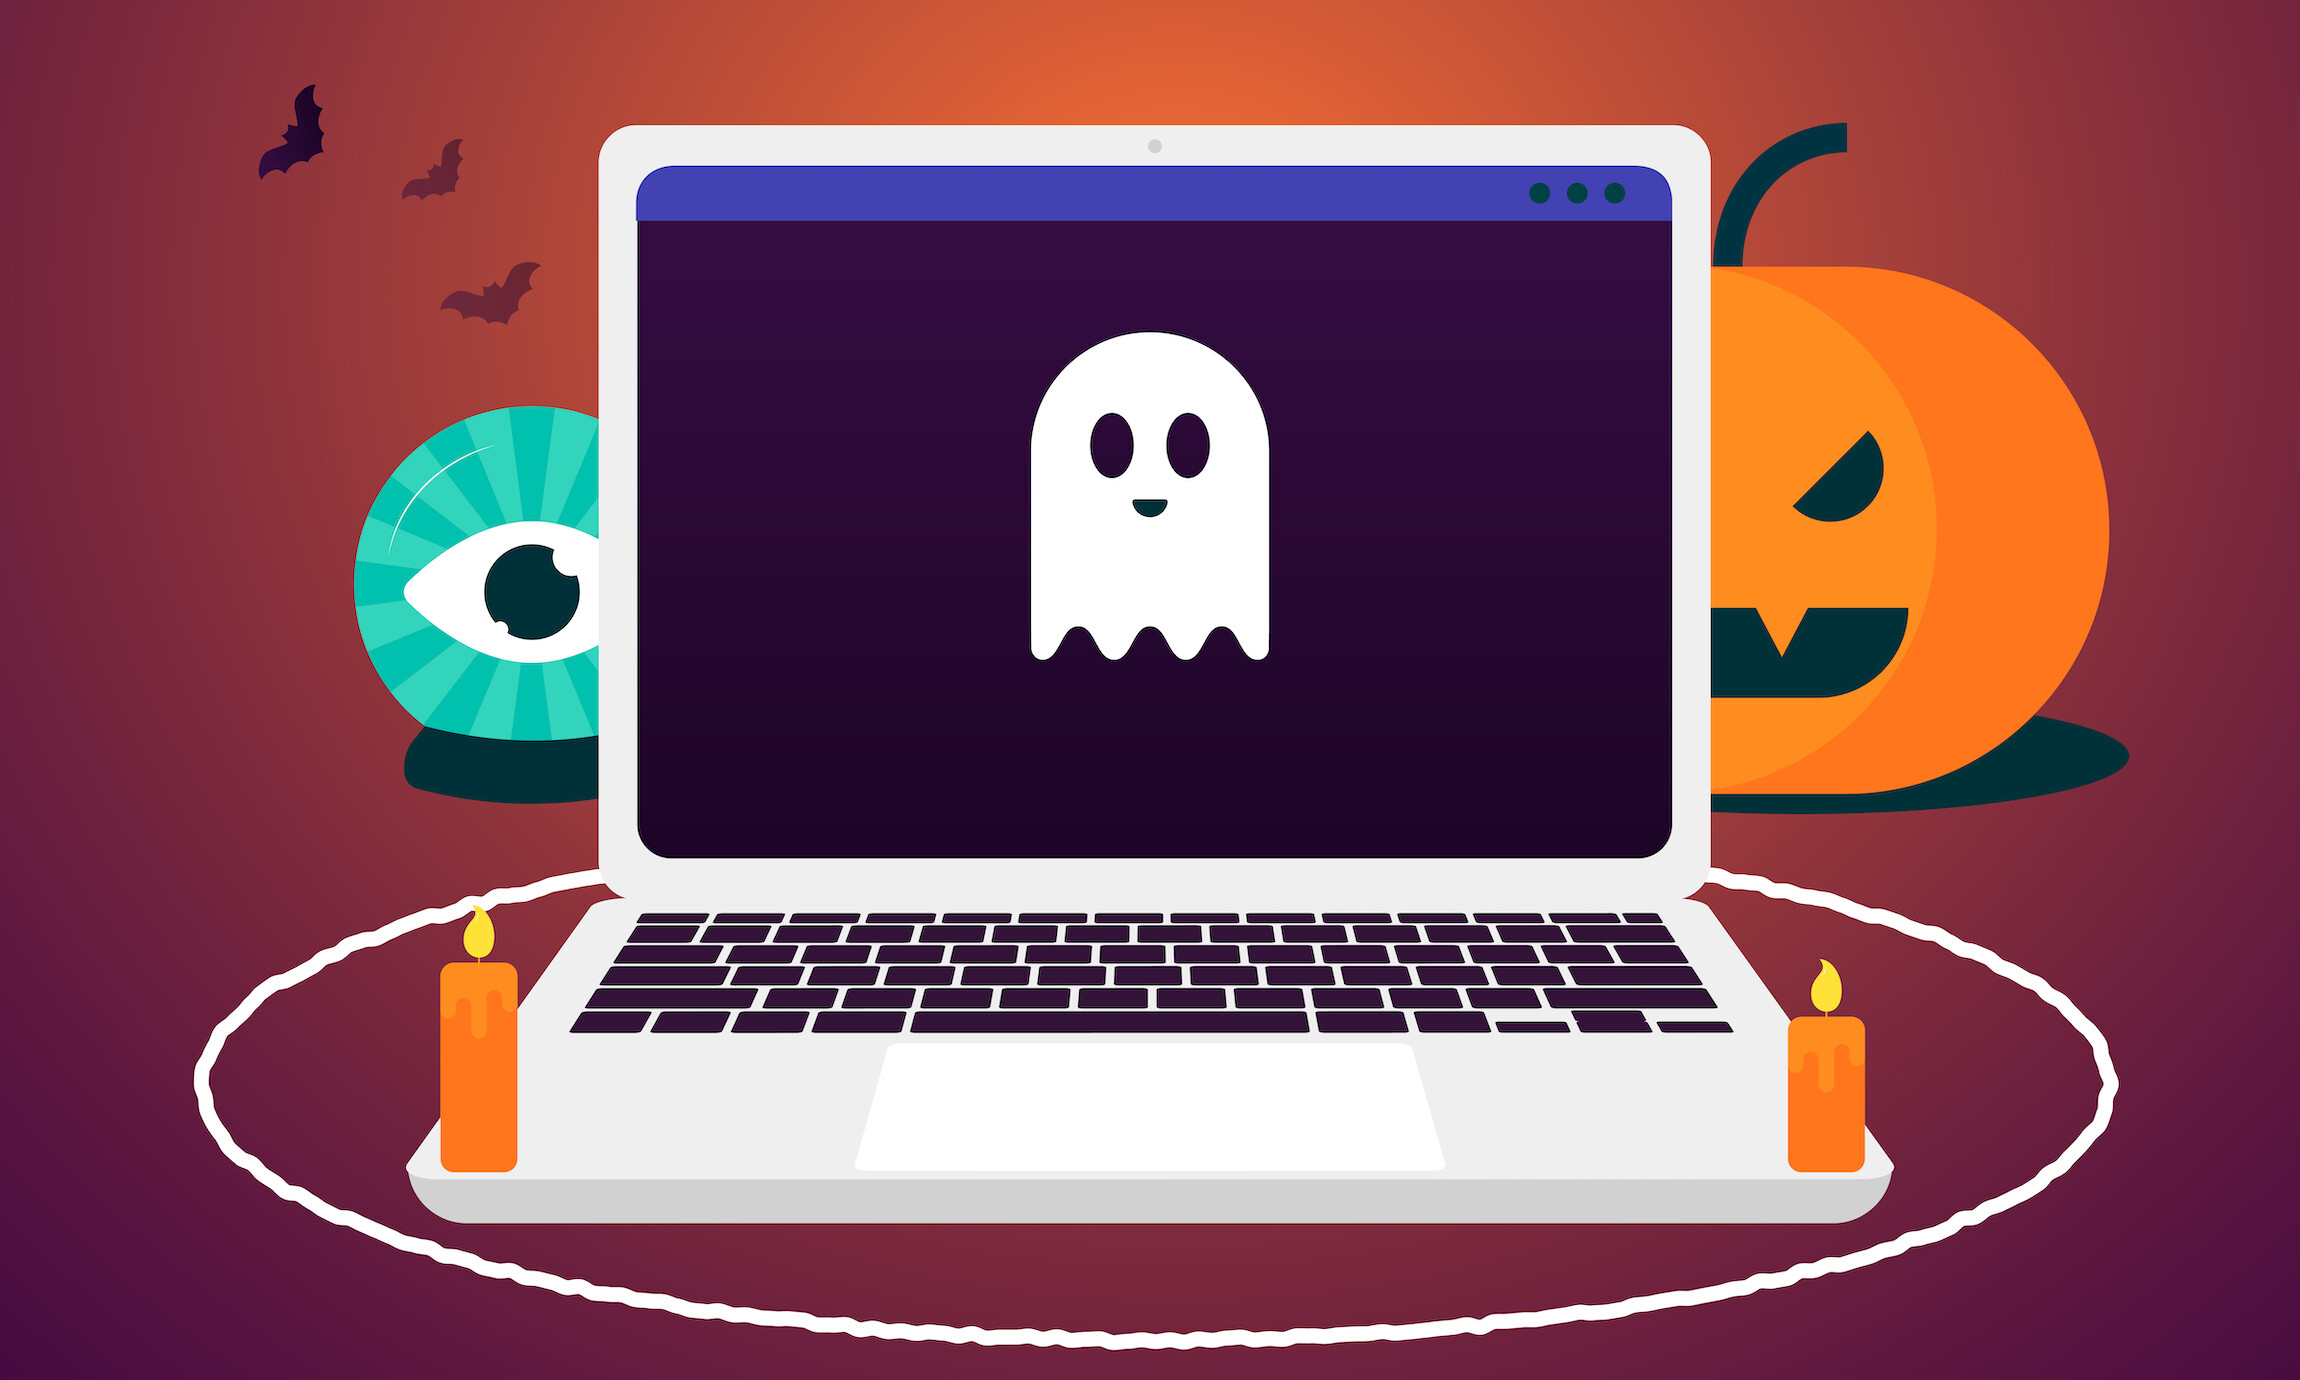 Why it’s a spooktacular time for brands and retailers to exorcize the nightmares of legacy tech once and for all